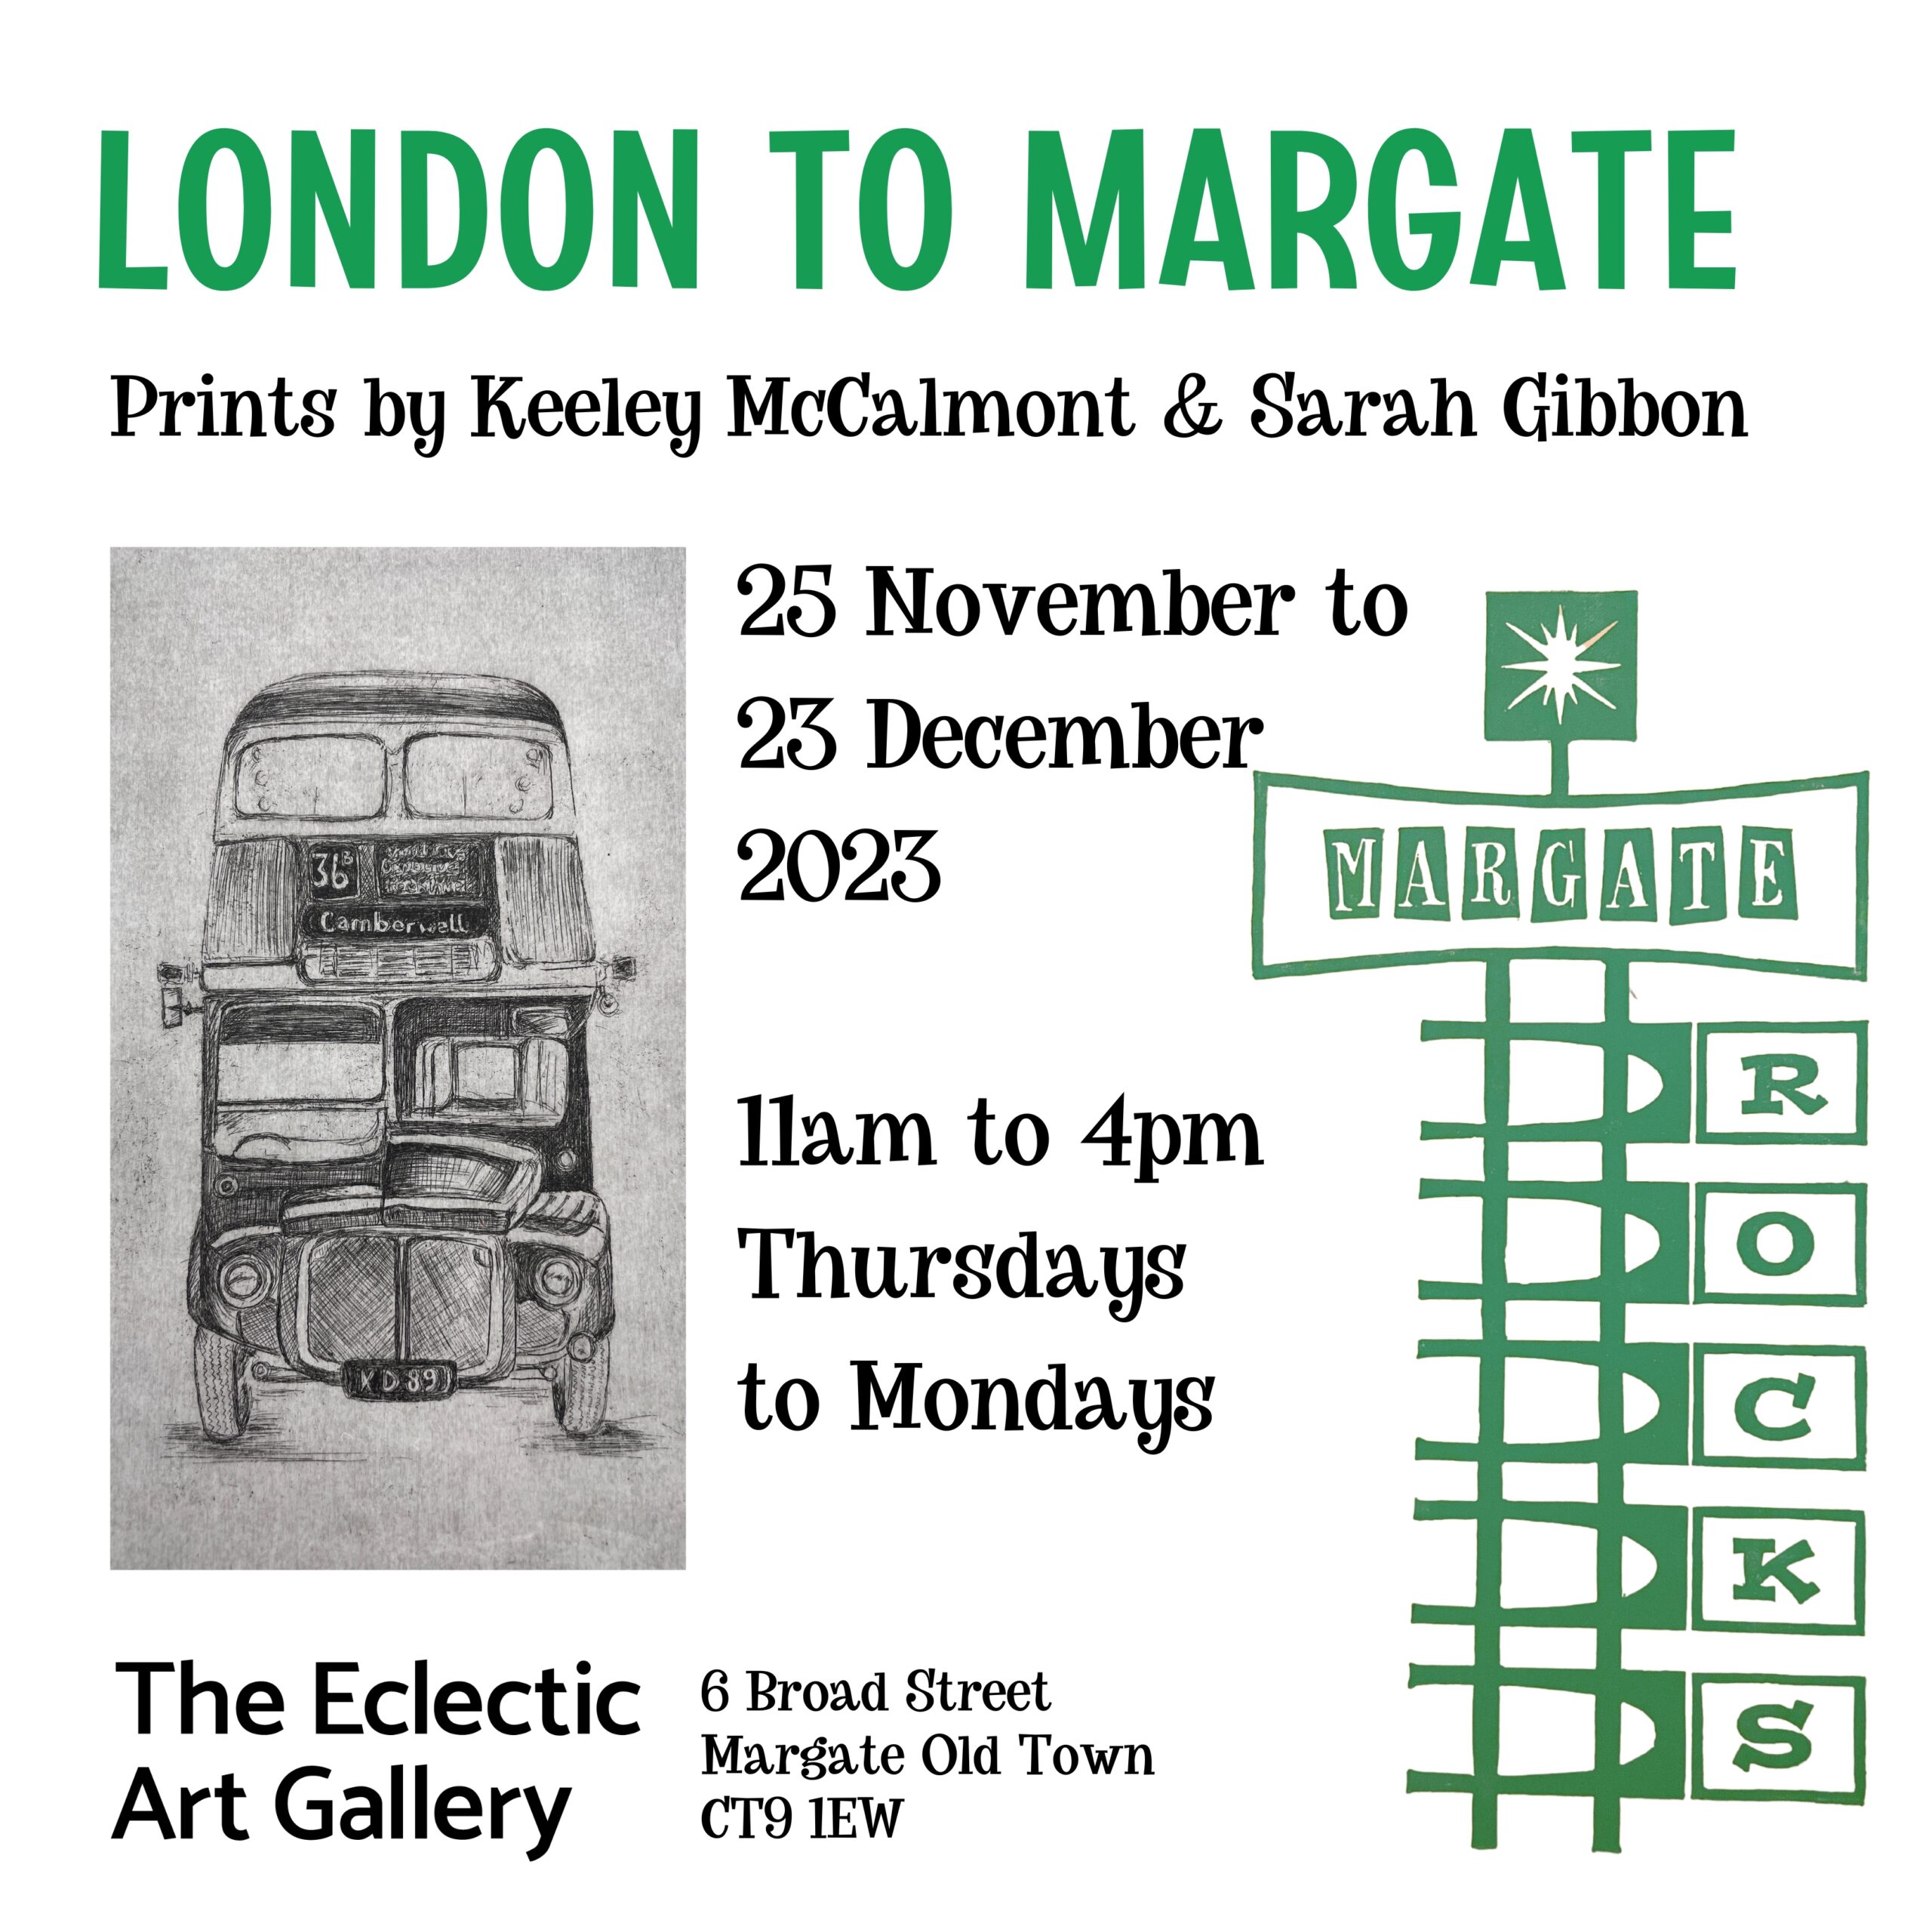 London to Margate: Hand-pulled Prints